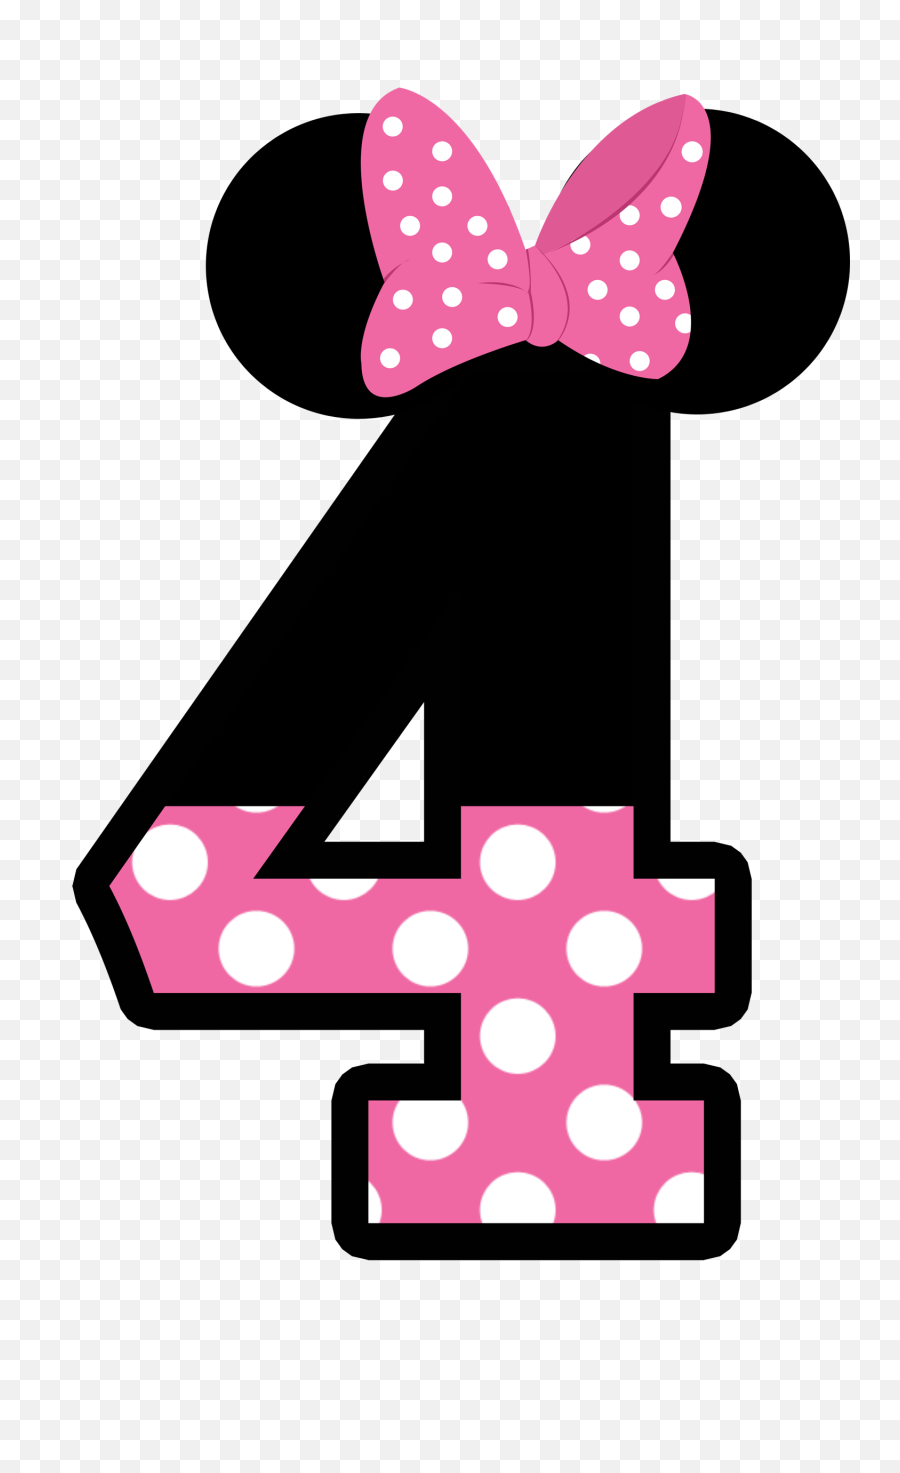 Free Minnie Mouse 1 Png Download Clip Art - Minnie Mouse 4 Png,Minnie Mouse Pink Png